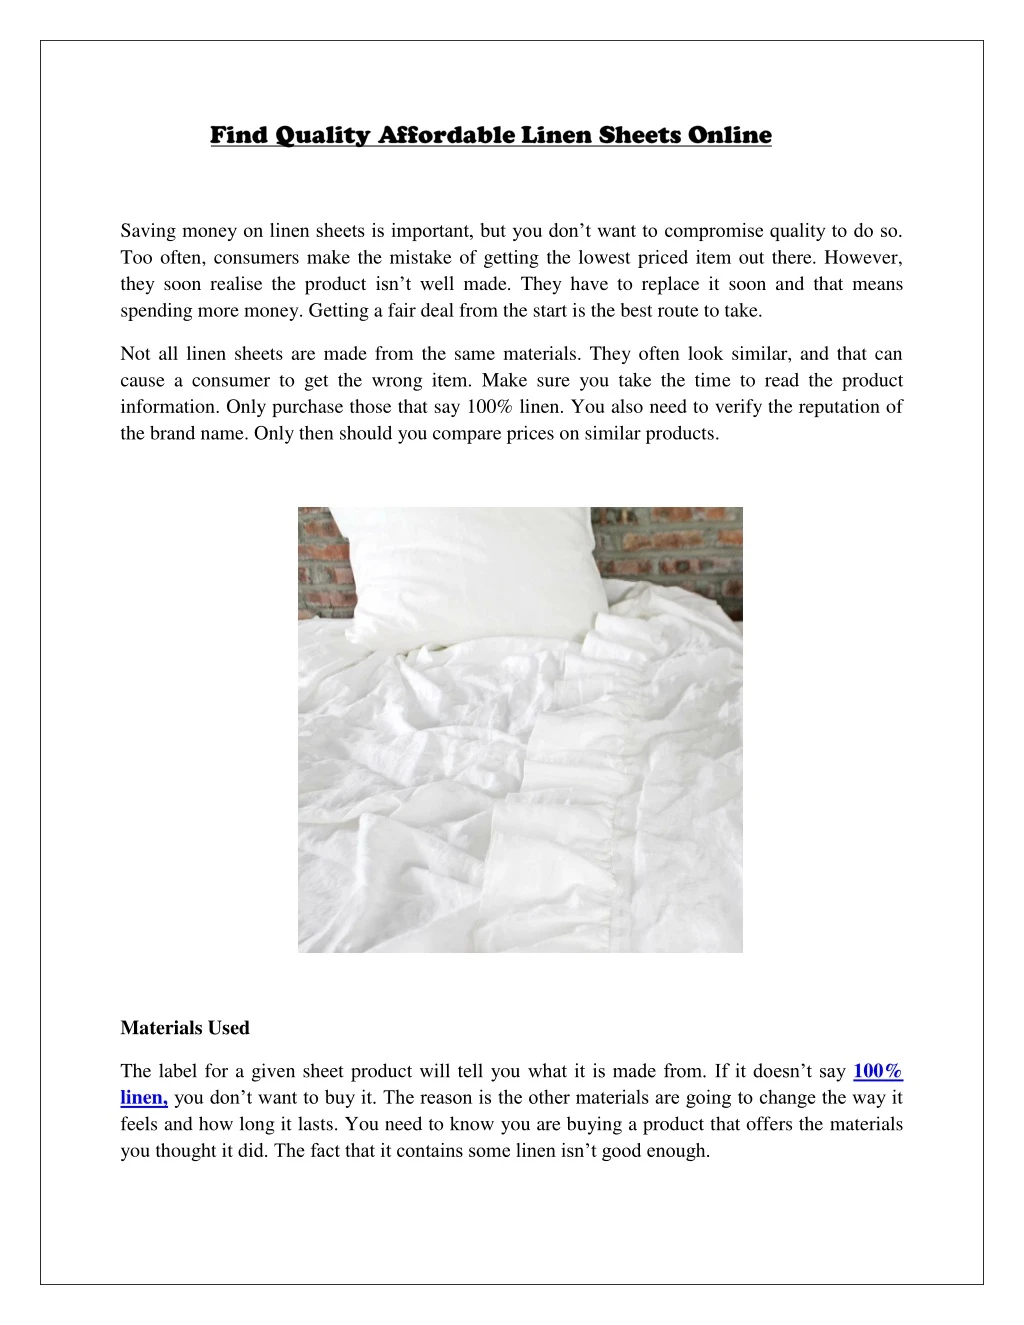 saving money on linen sheets is important